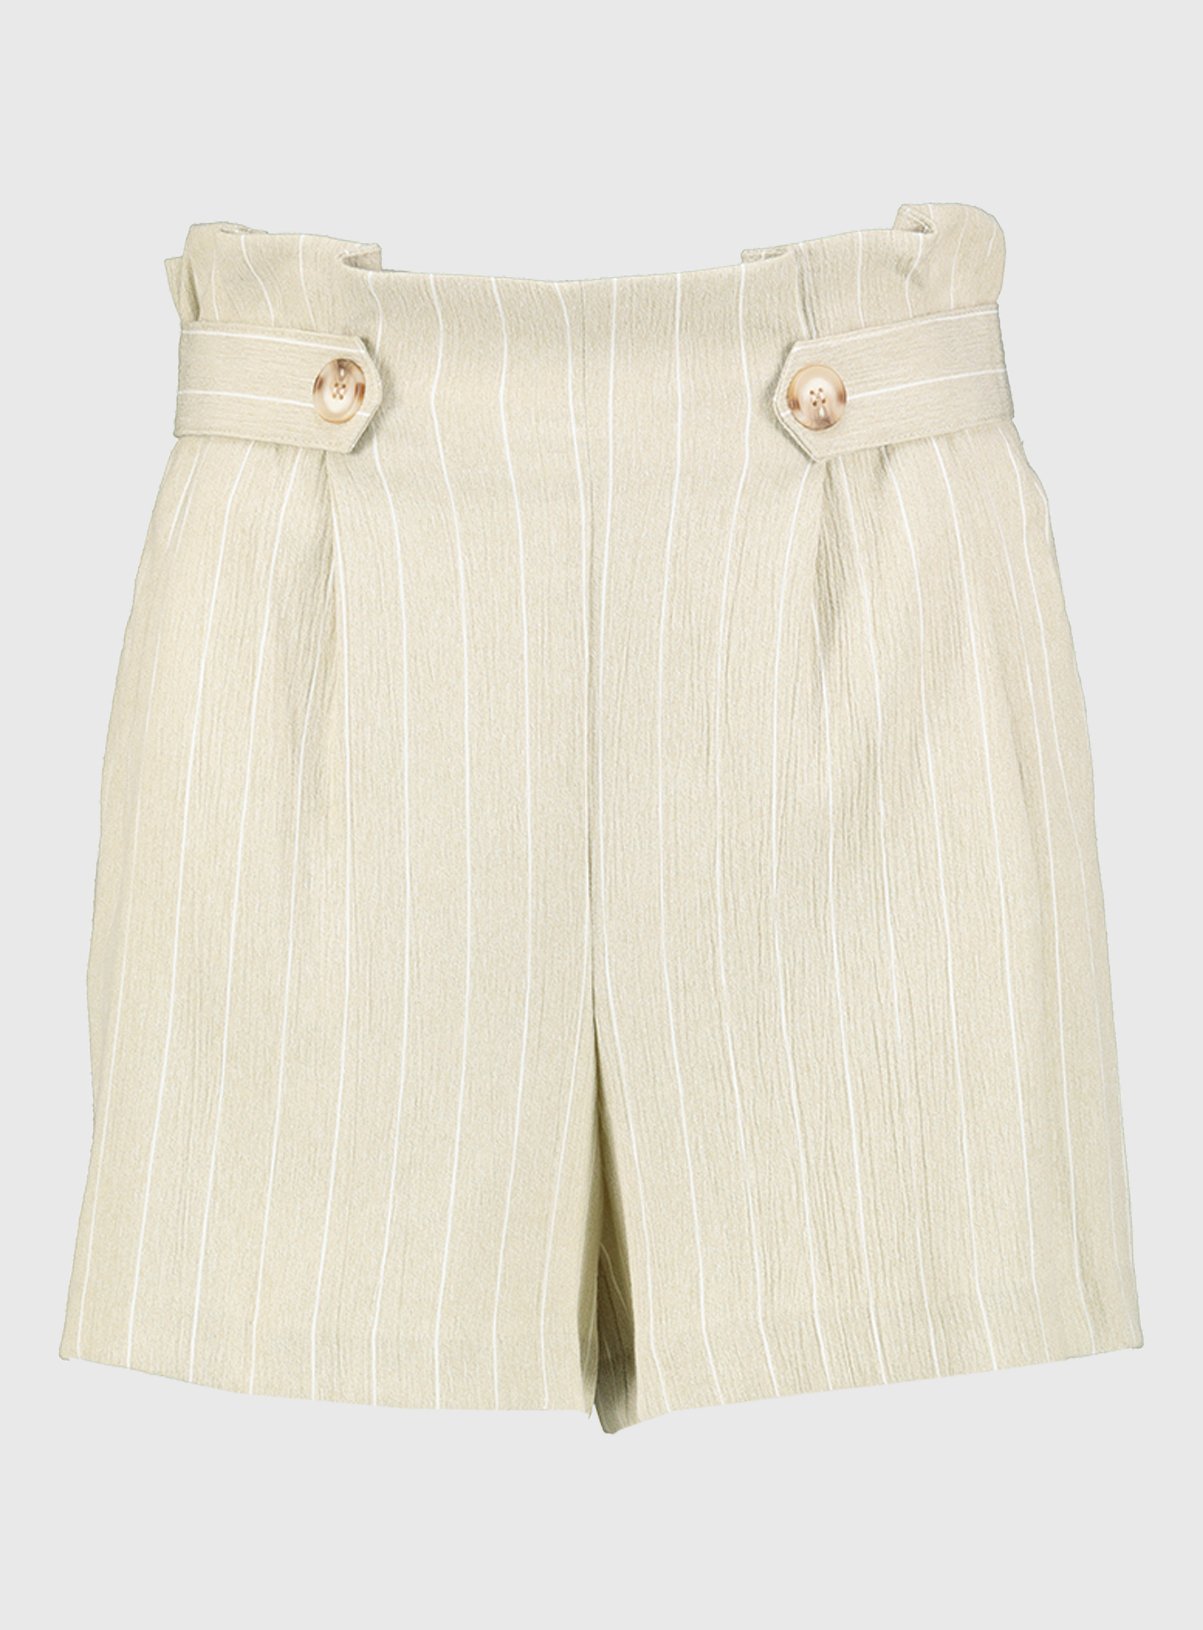 Beige Textured Stripe High Waisted Shorts Review